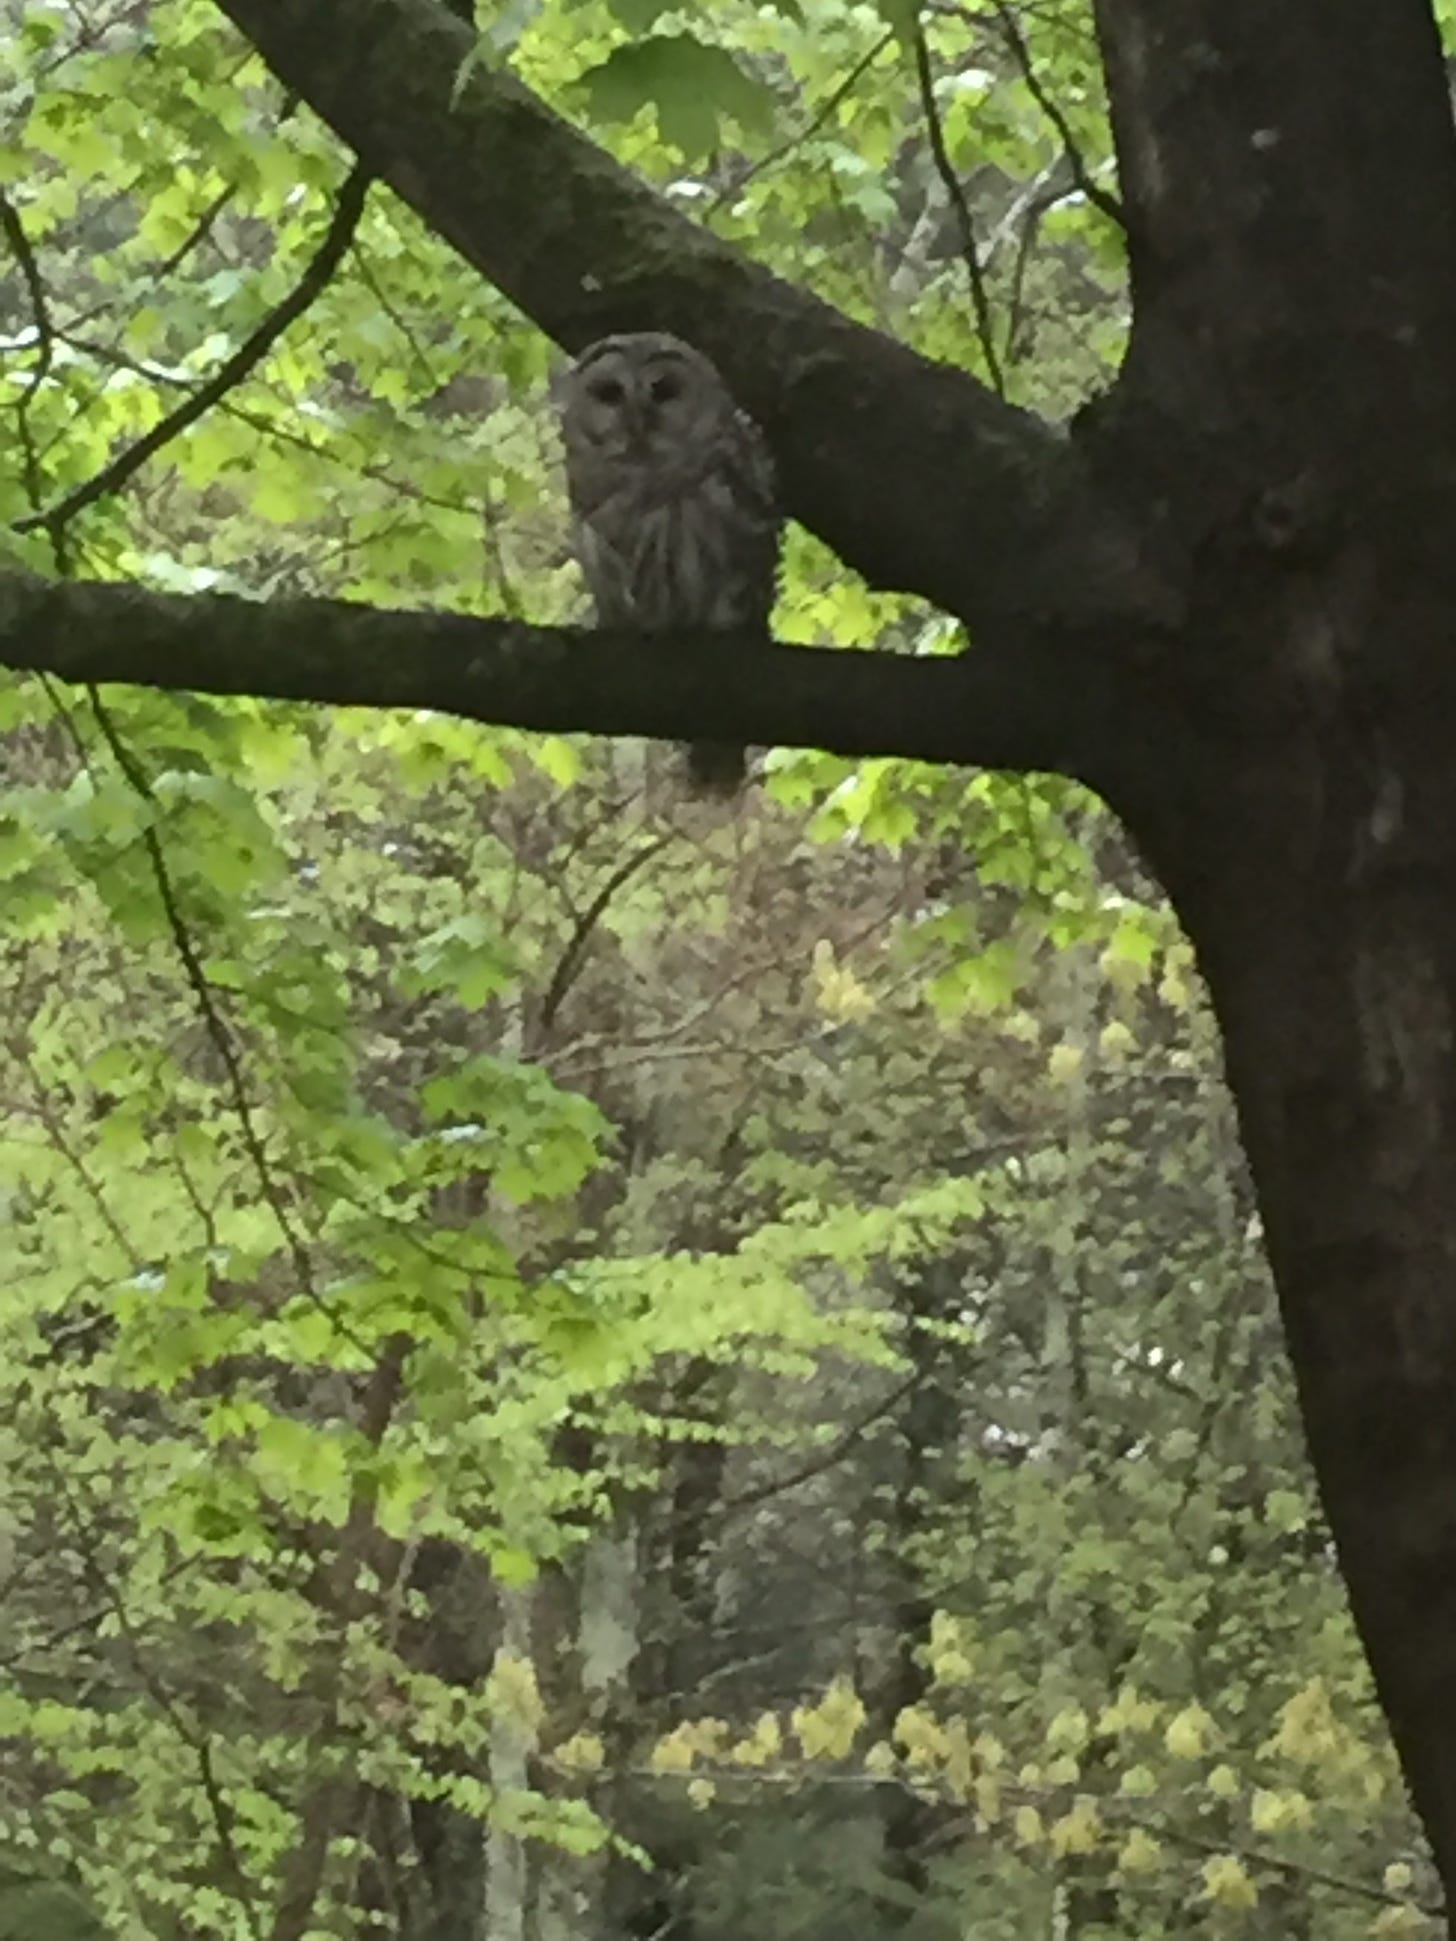 A barred owl perched on a tree branch, woods in the background